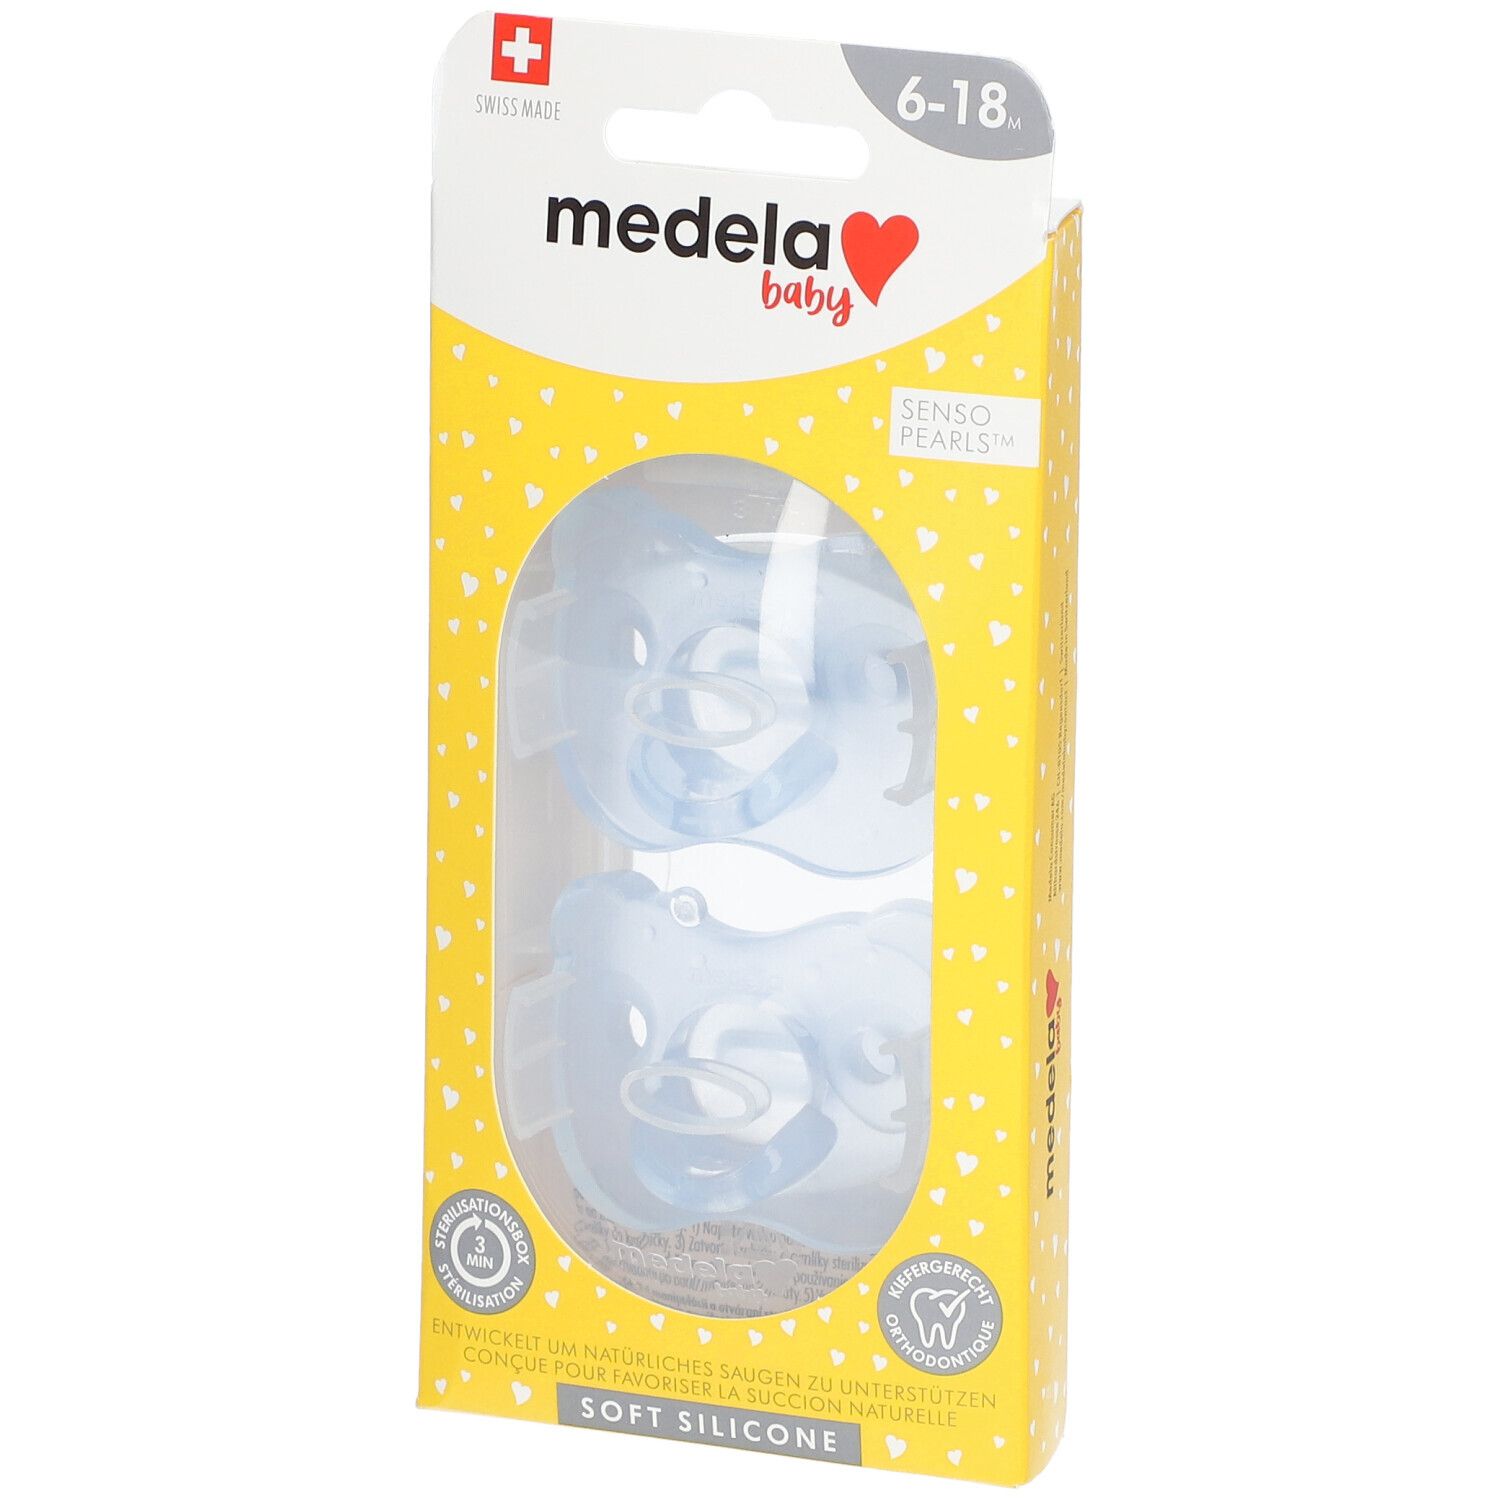 Medela Baby Soft Silicone Sucette Soft 6-18 Mois DUO 2 tétine